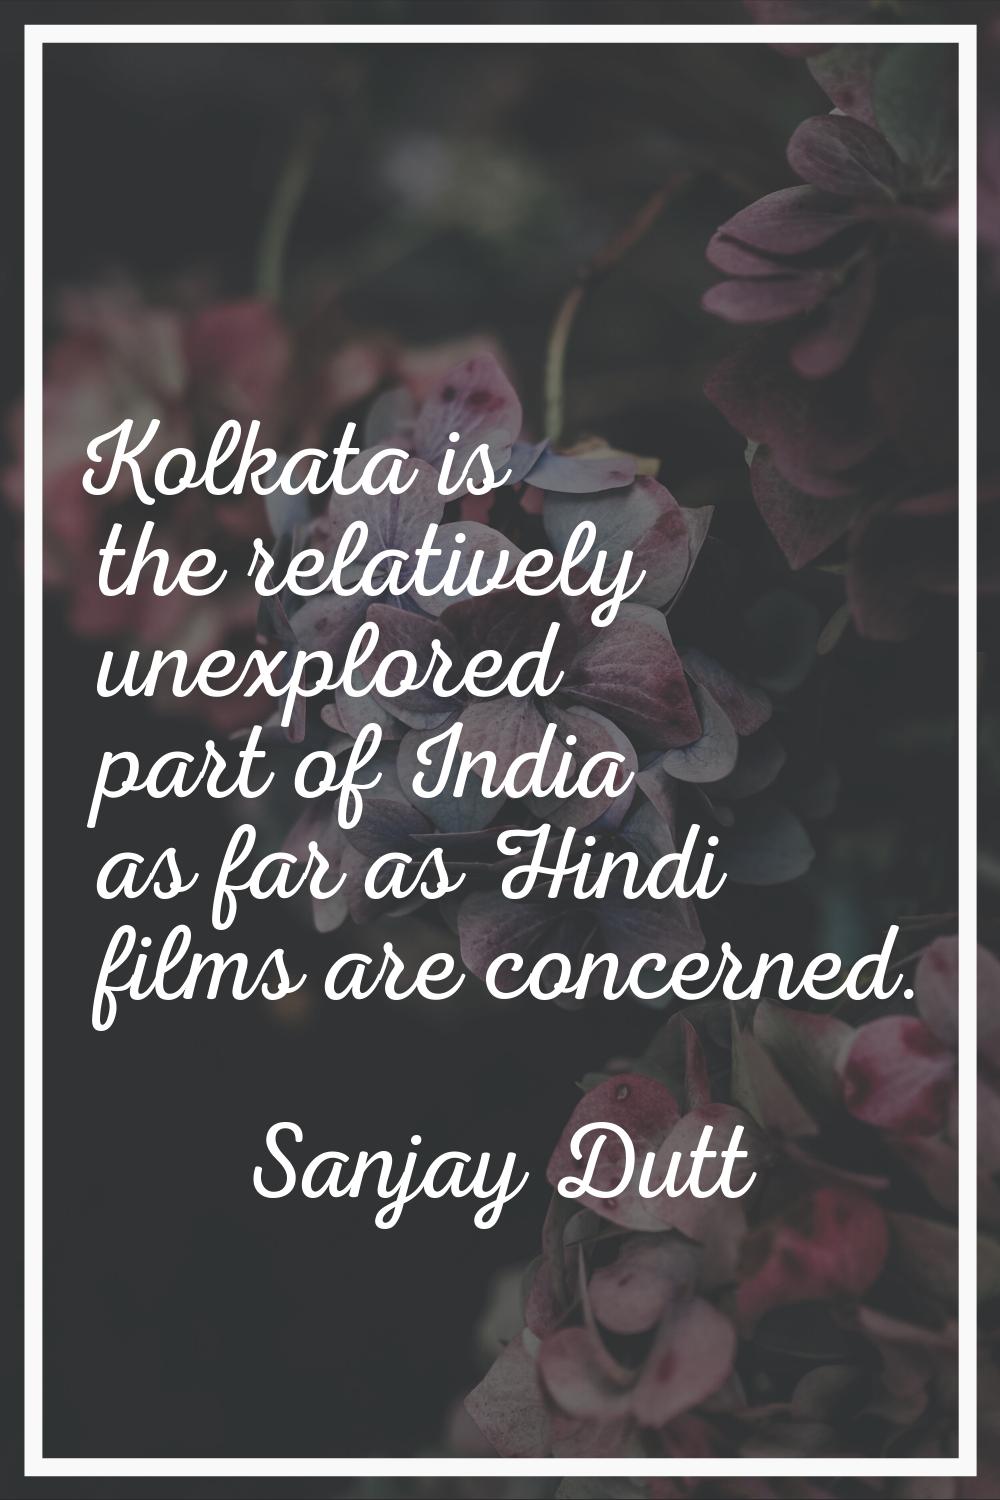 Kolkata is the relatively unexplored part of India as far as Hindi films are concerned.